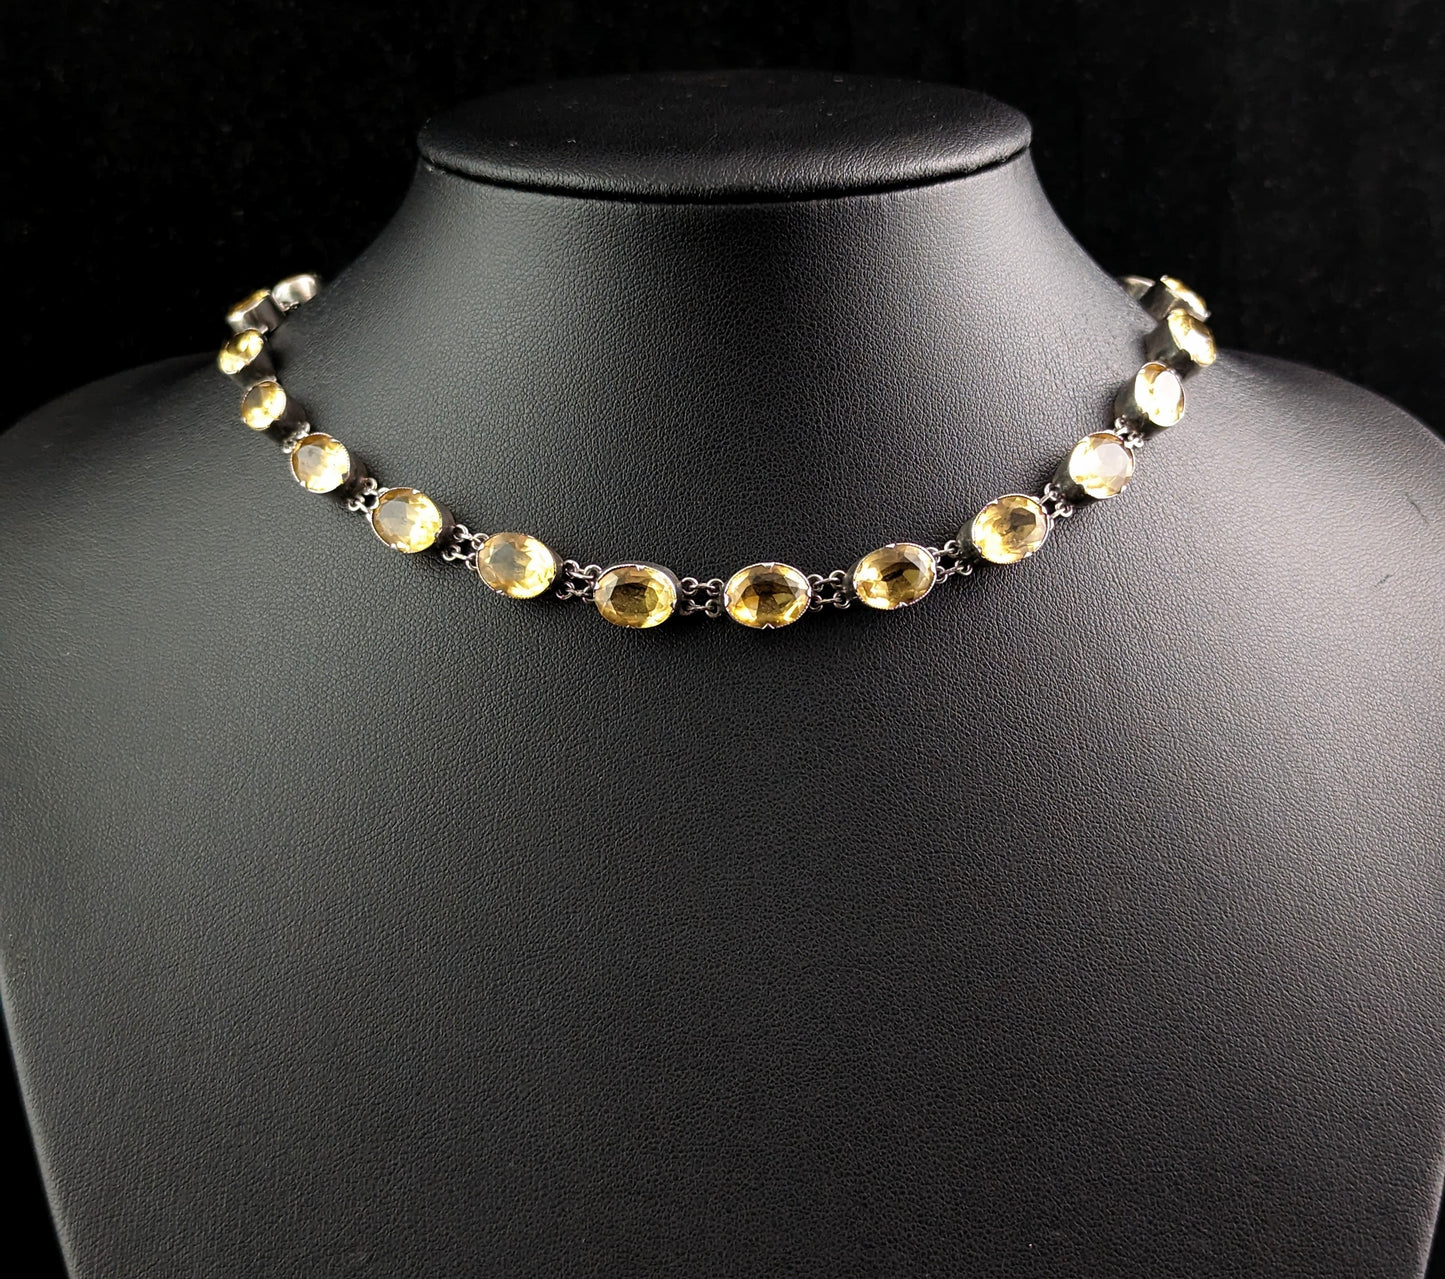 Antique Georgian Citrine riviere necklace, sterling silver